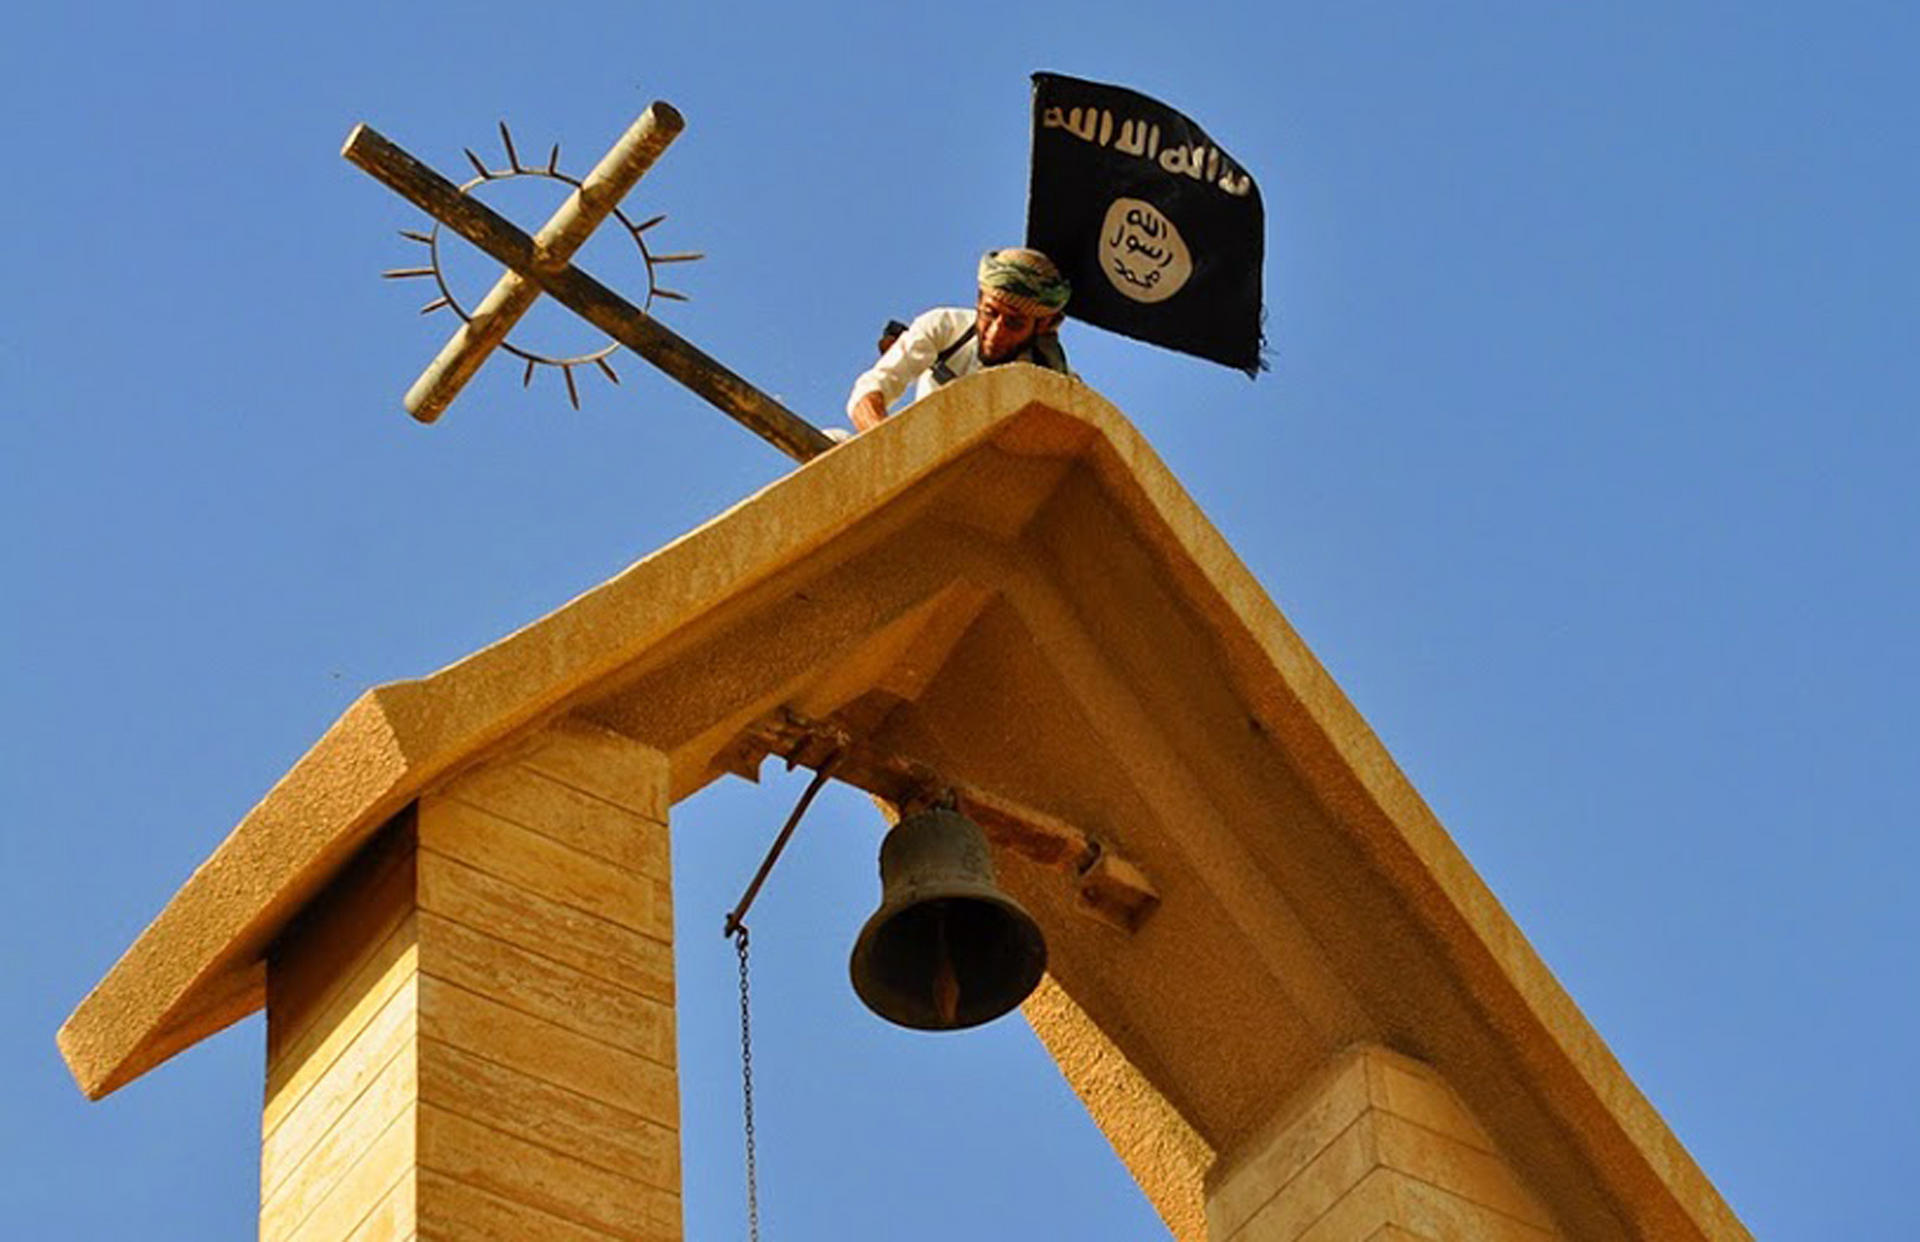 A member of Islamic State holds up its flag as he dismantles a cross on the top of a church in Mosul, Iraq, in this photo released by a militant website. Photo: AP